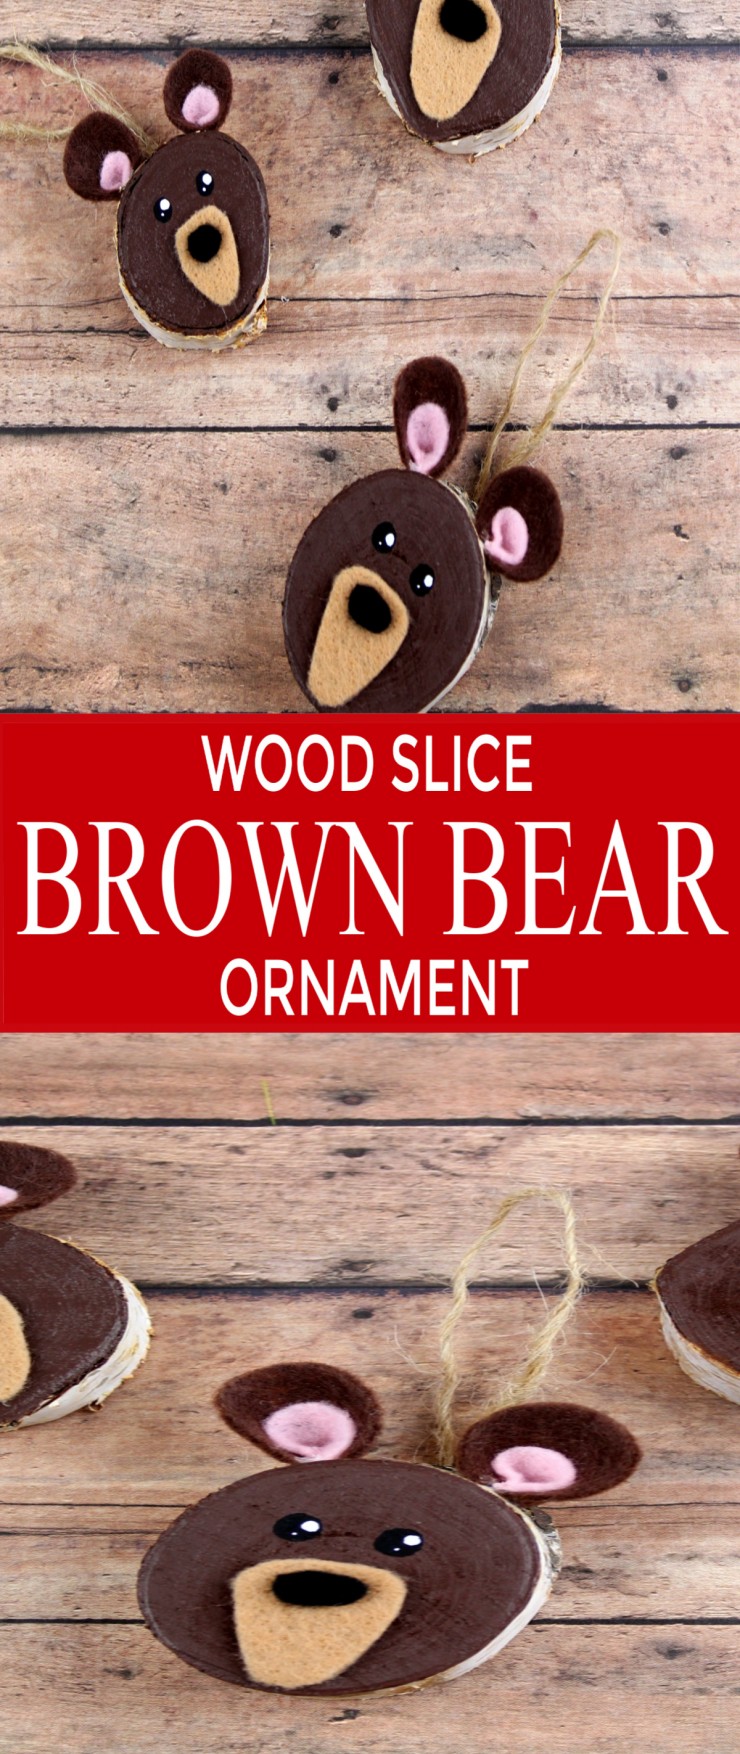  These Wood Slice Brown Bear Ornaments are an easy Christmas ornament craft that results in adorably rustic décor for your tree!